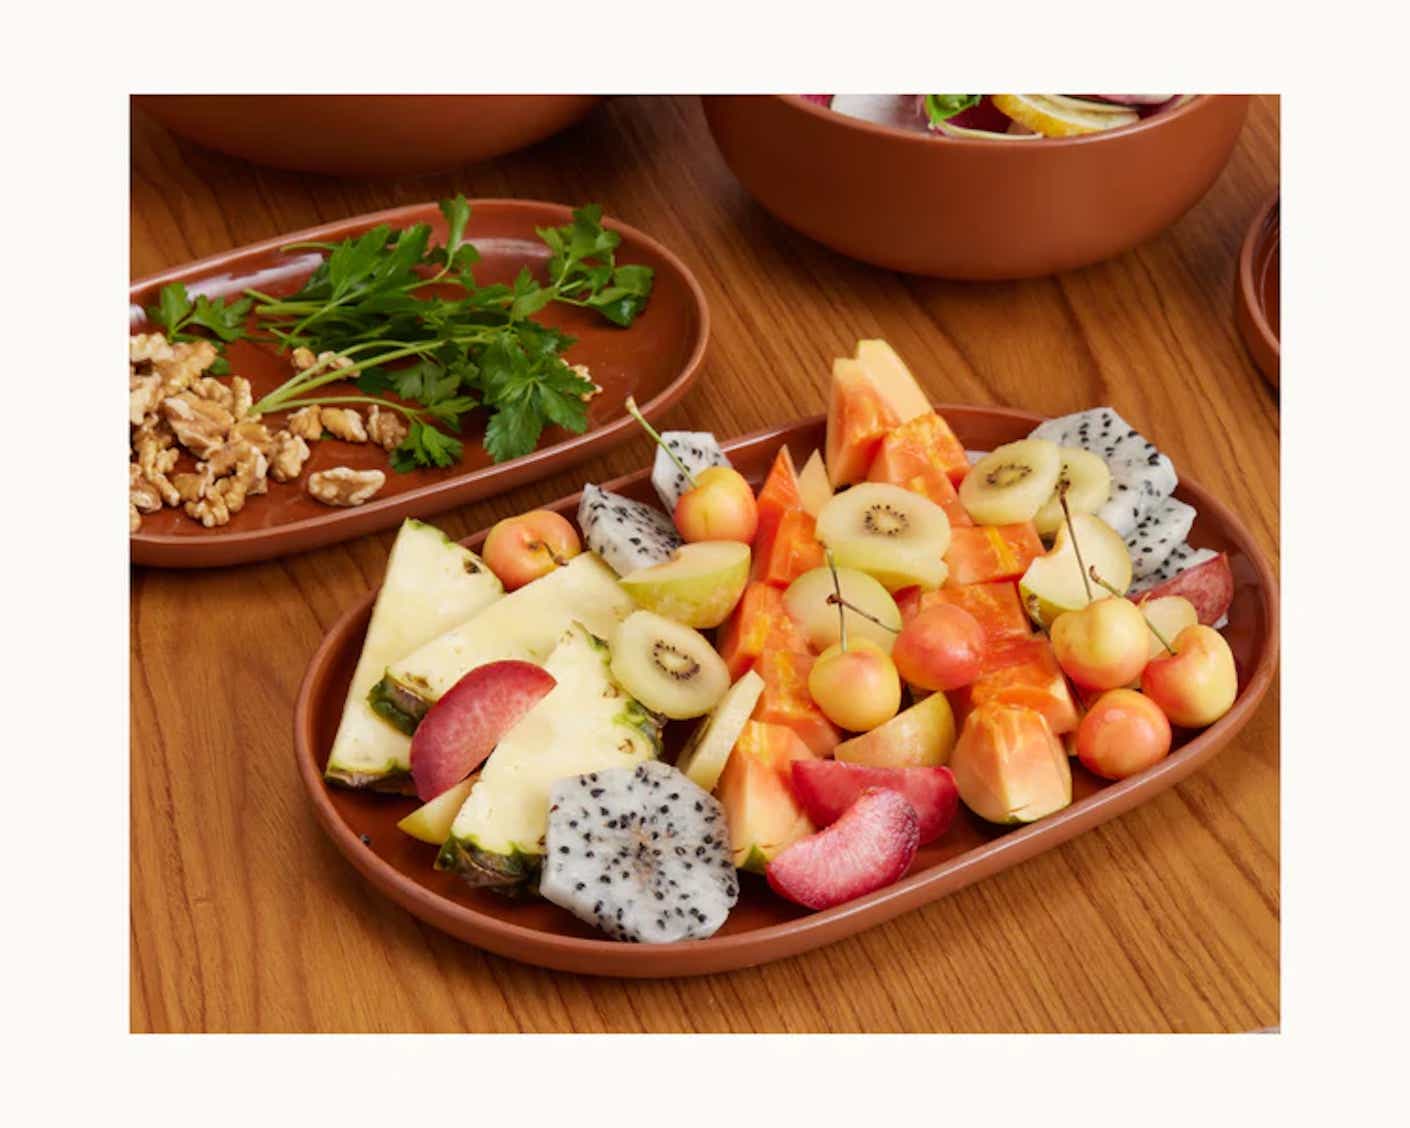 A flat serving platter with rounded edges holds an array of colorful fruits.